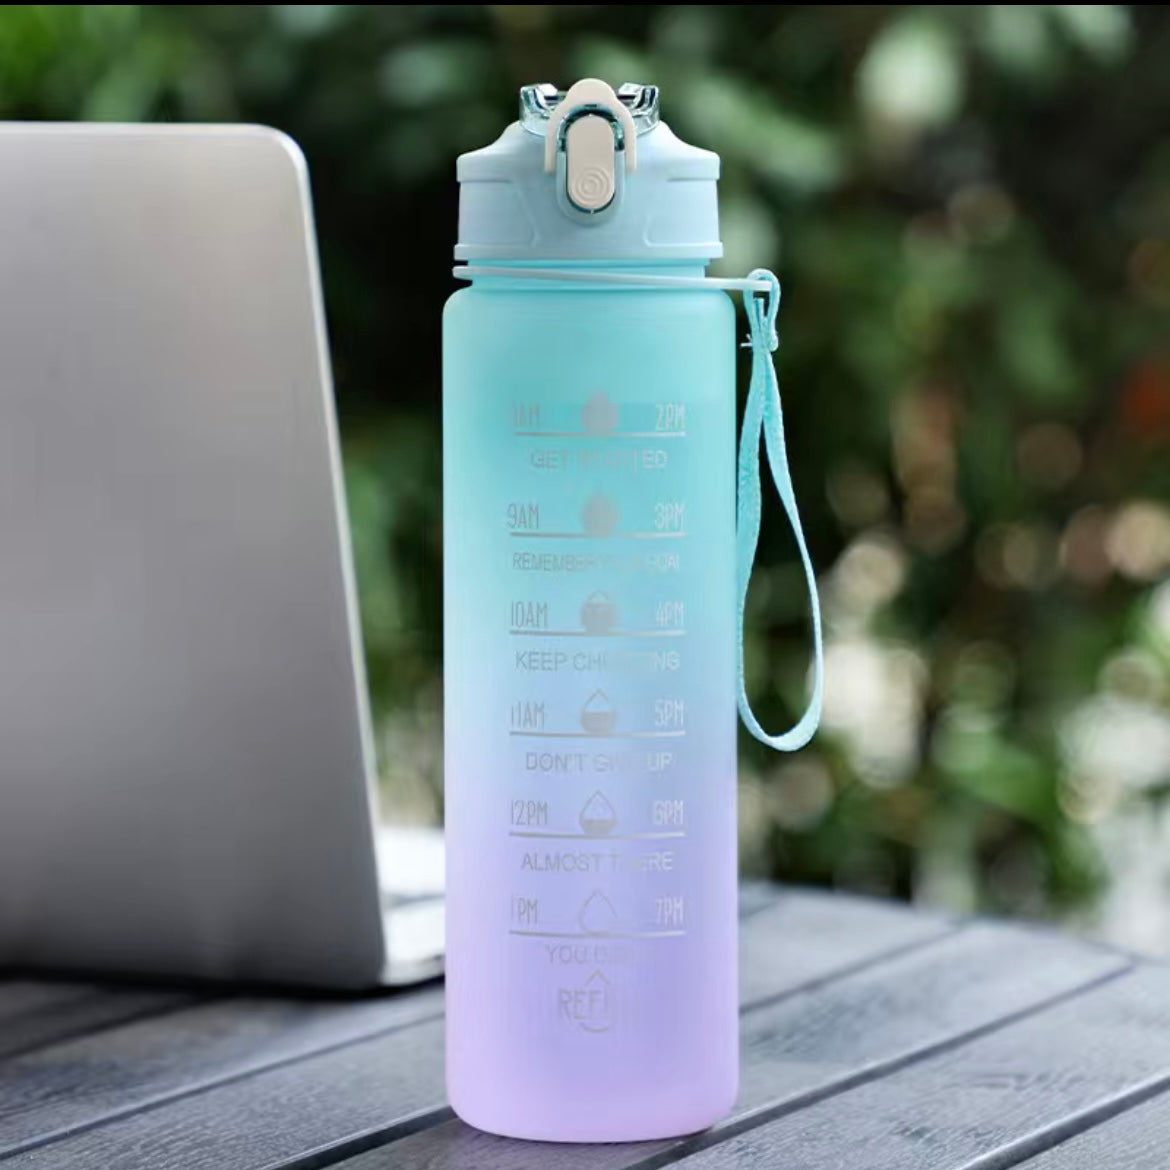 Blue and purple Water Bottle